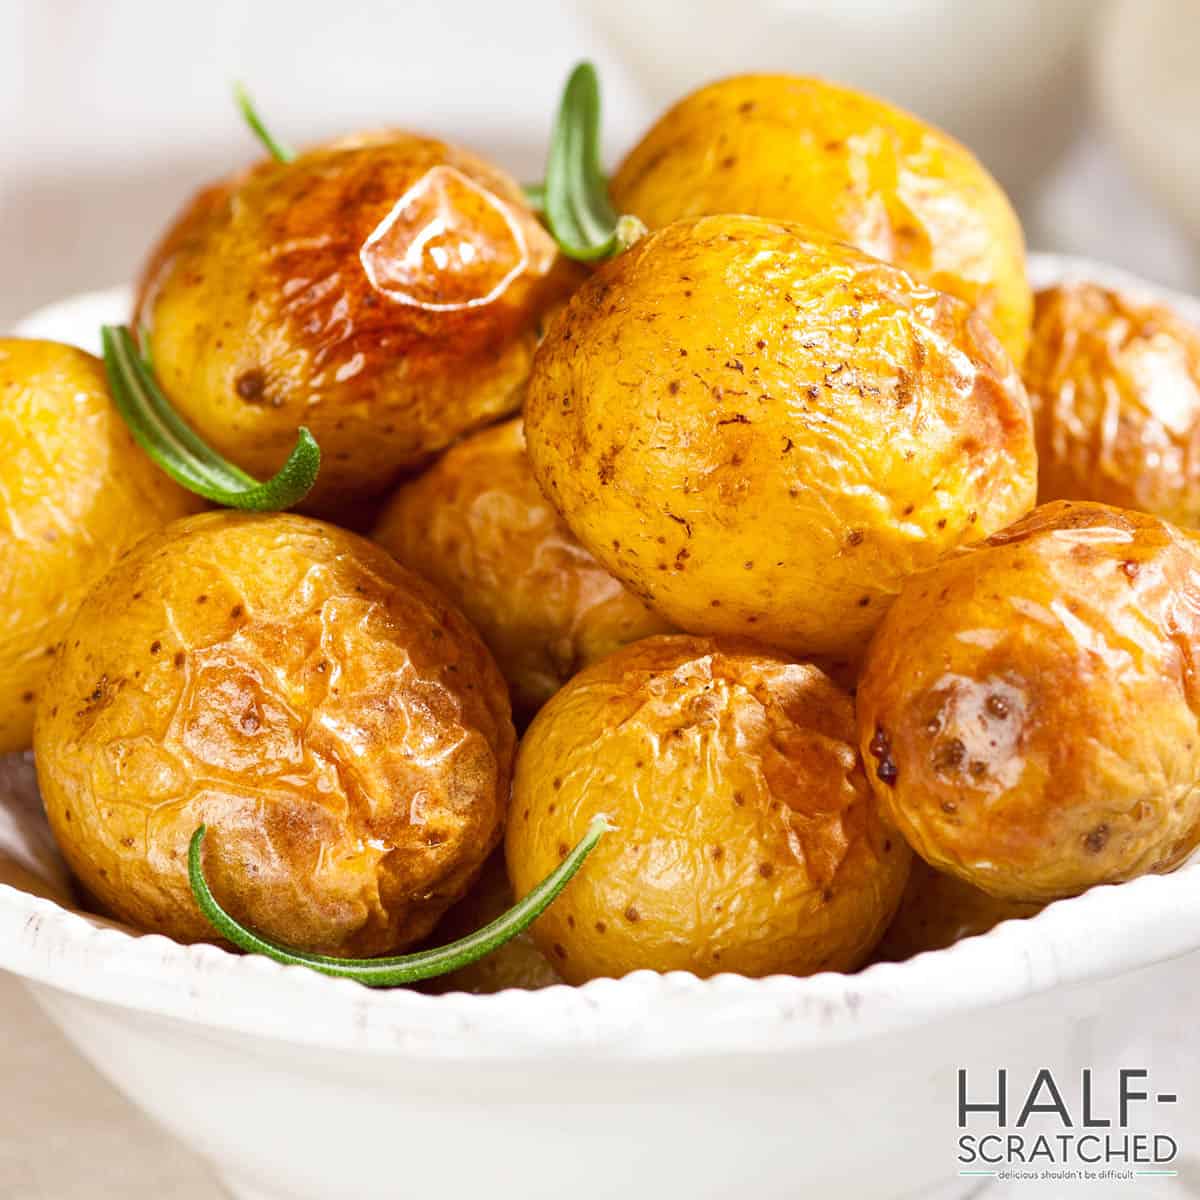 Baked potatoes served